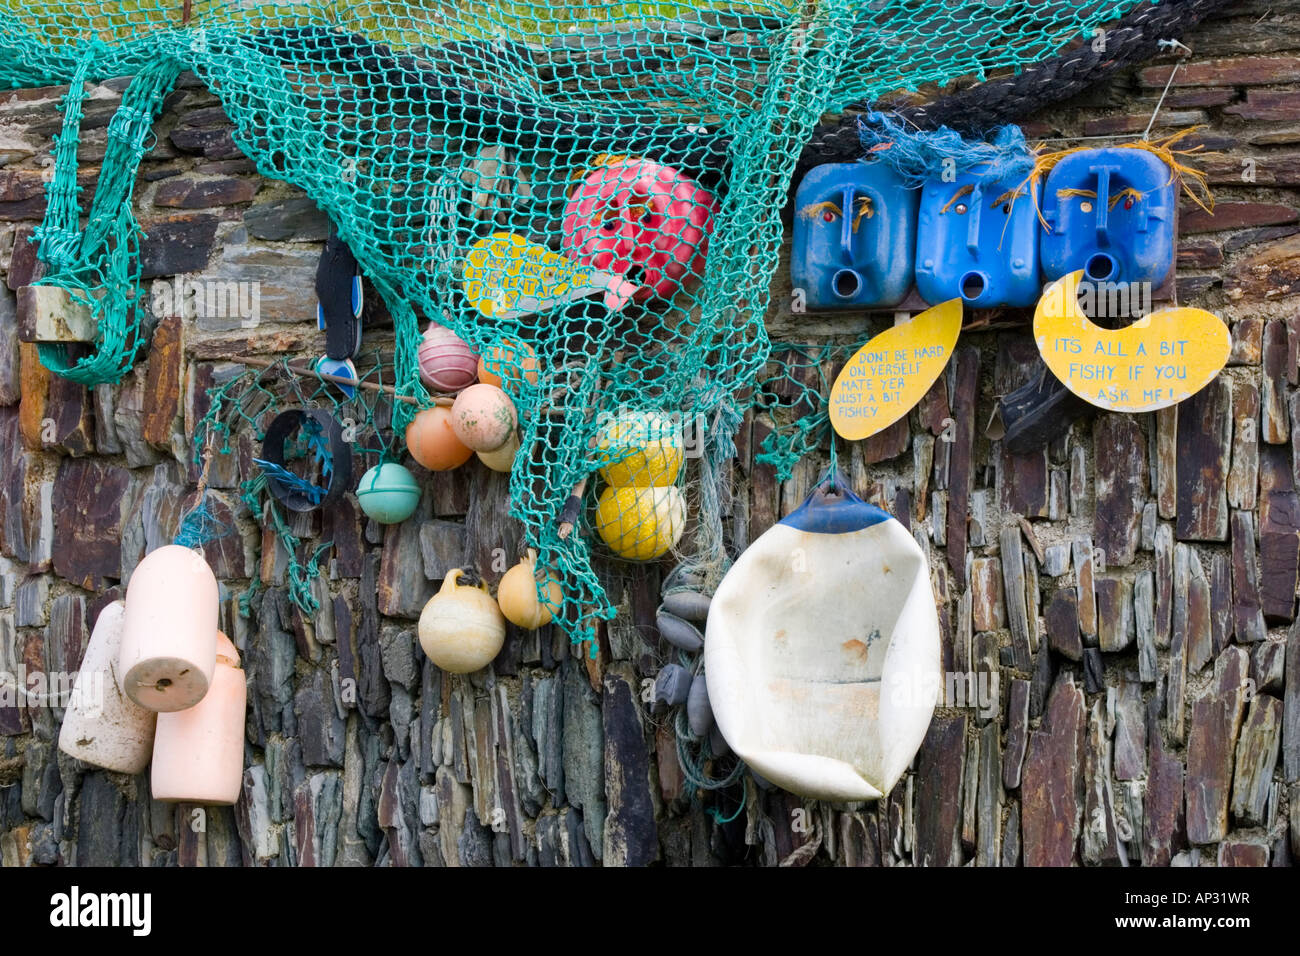 Beach art made from old fishing nets fishing buoys and plastic